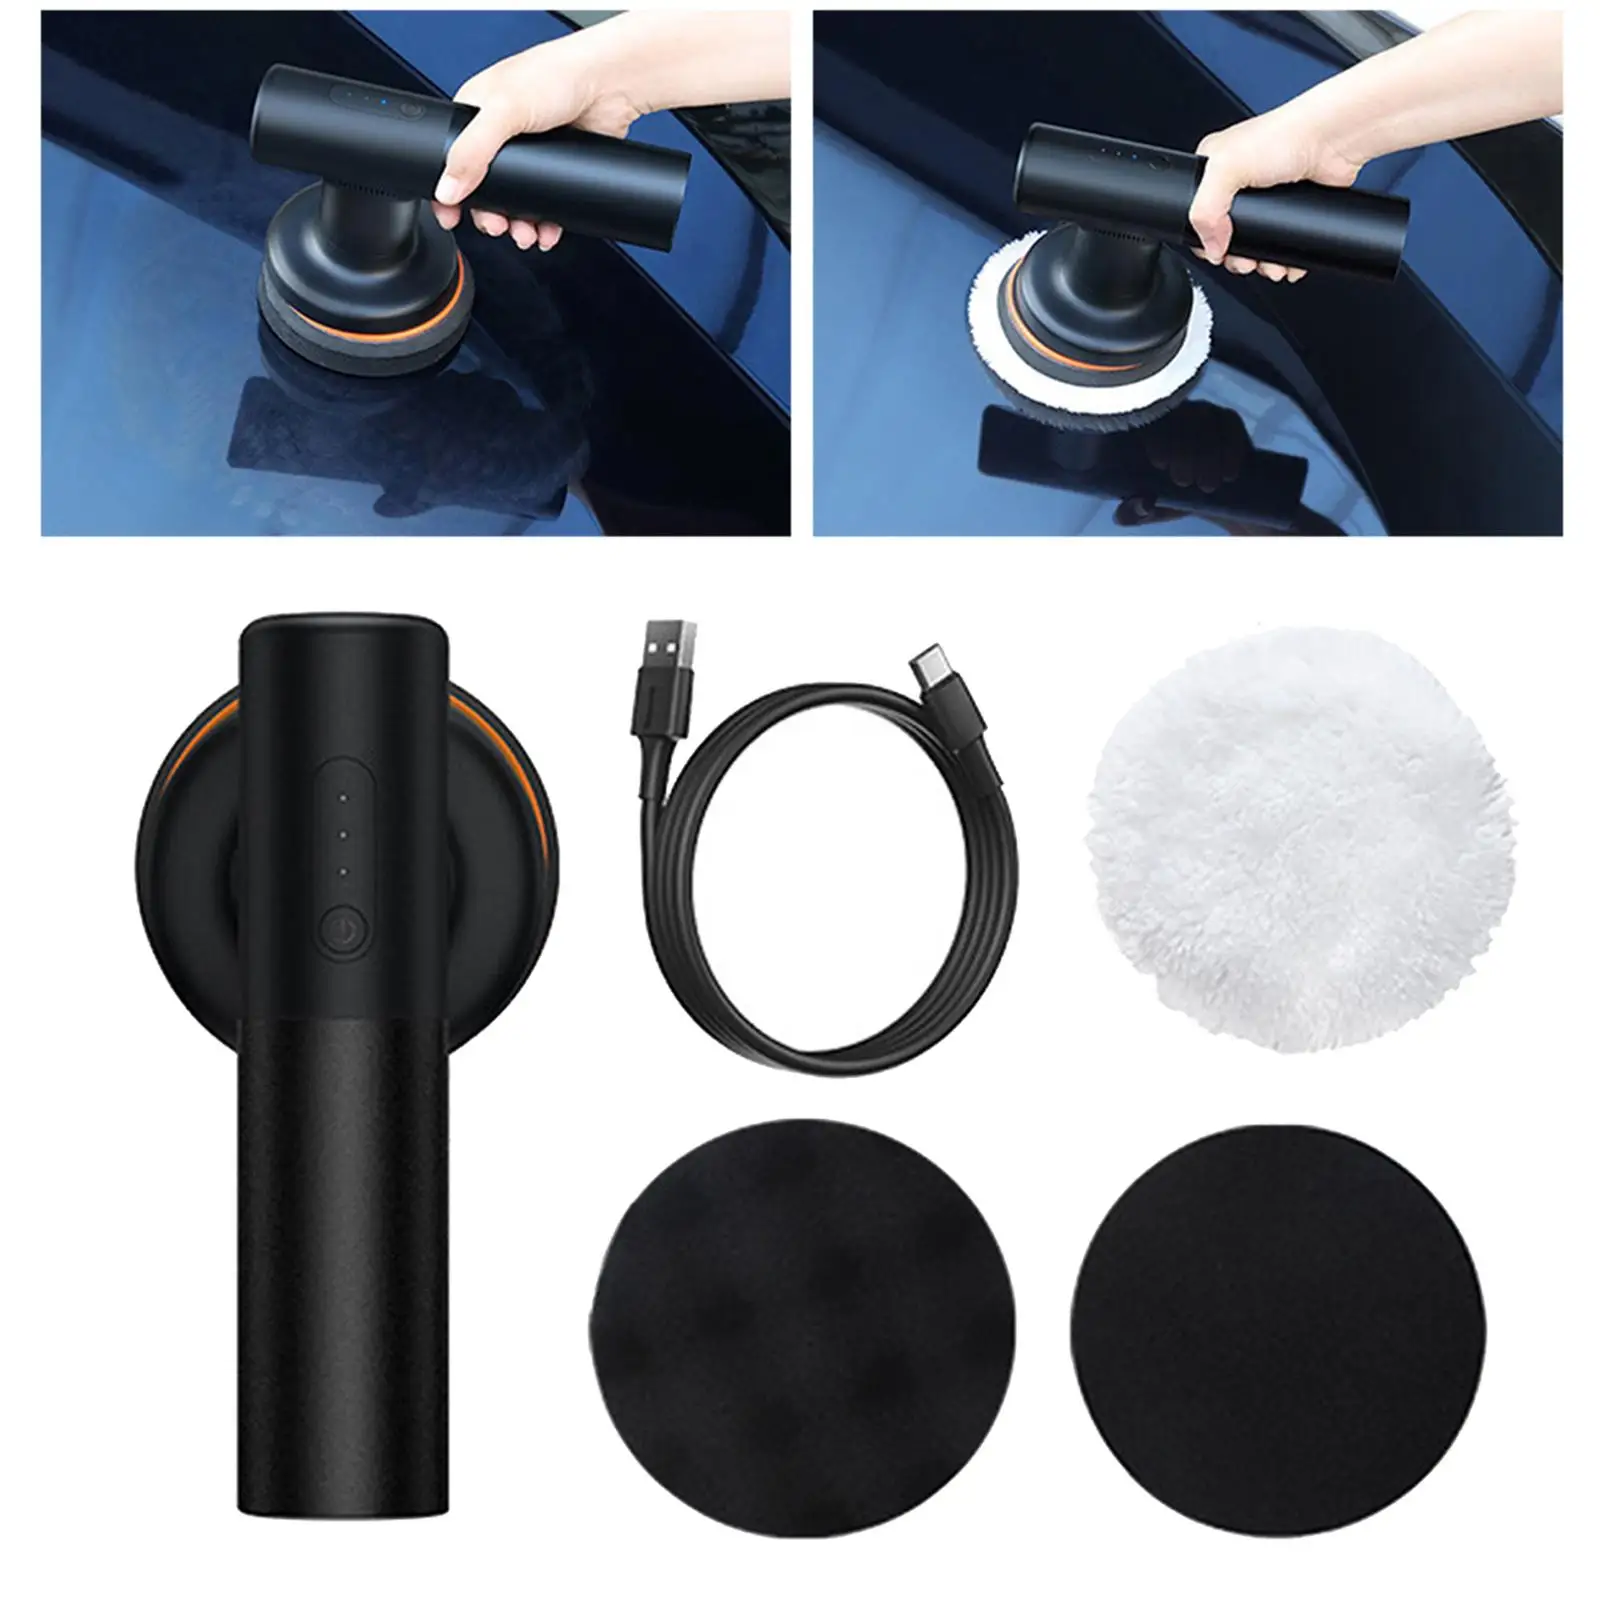 auto Polisher Powerful 45 Polishing Electric Car Polisher for Car Detailing Tools Accessories Fits for Cleaning Machine 2 Gear